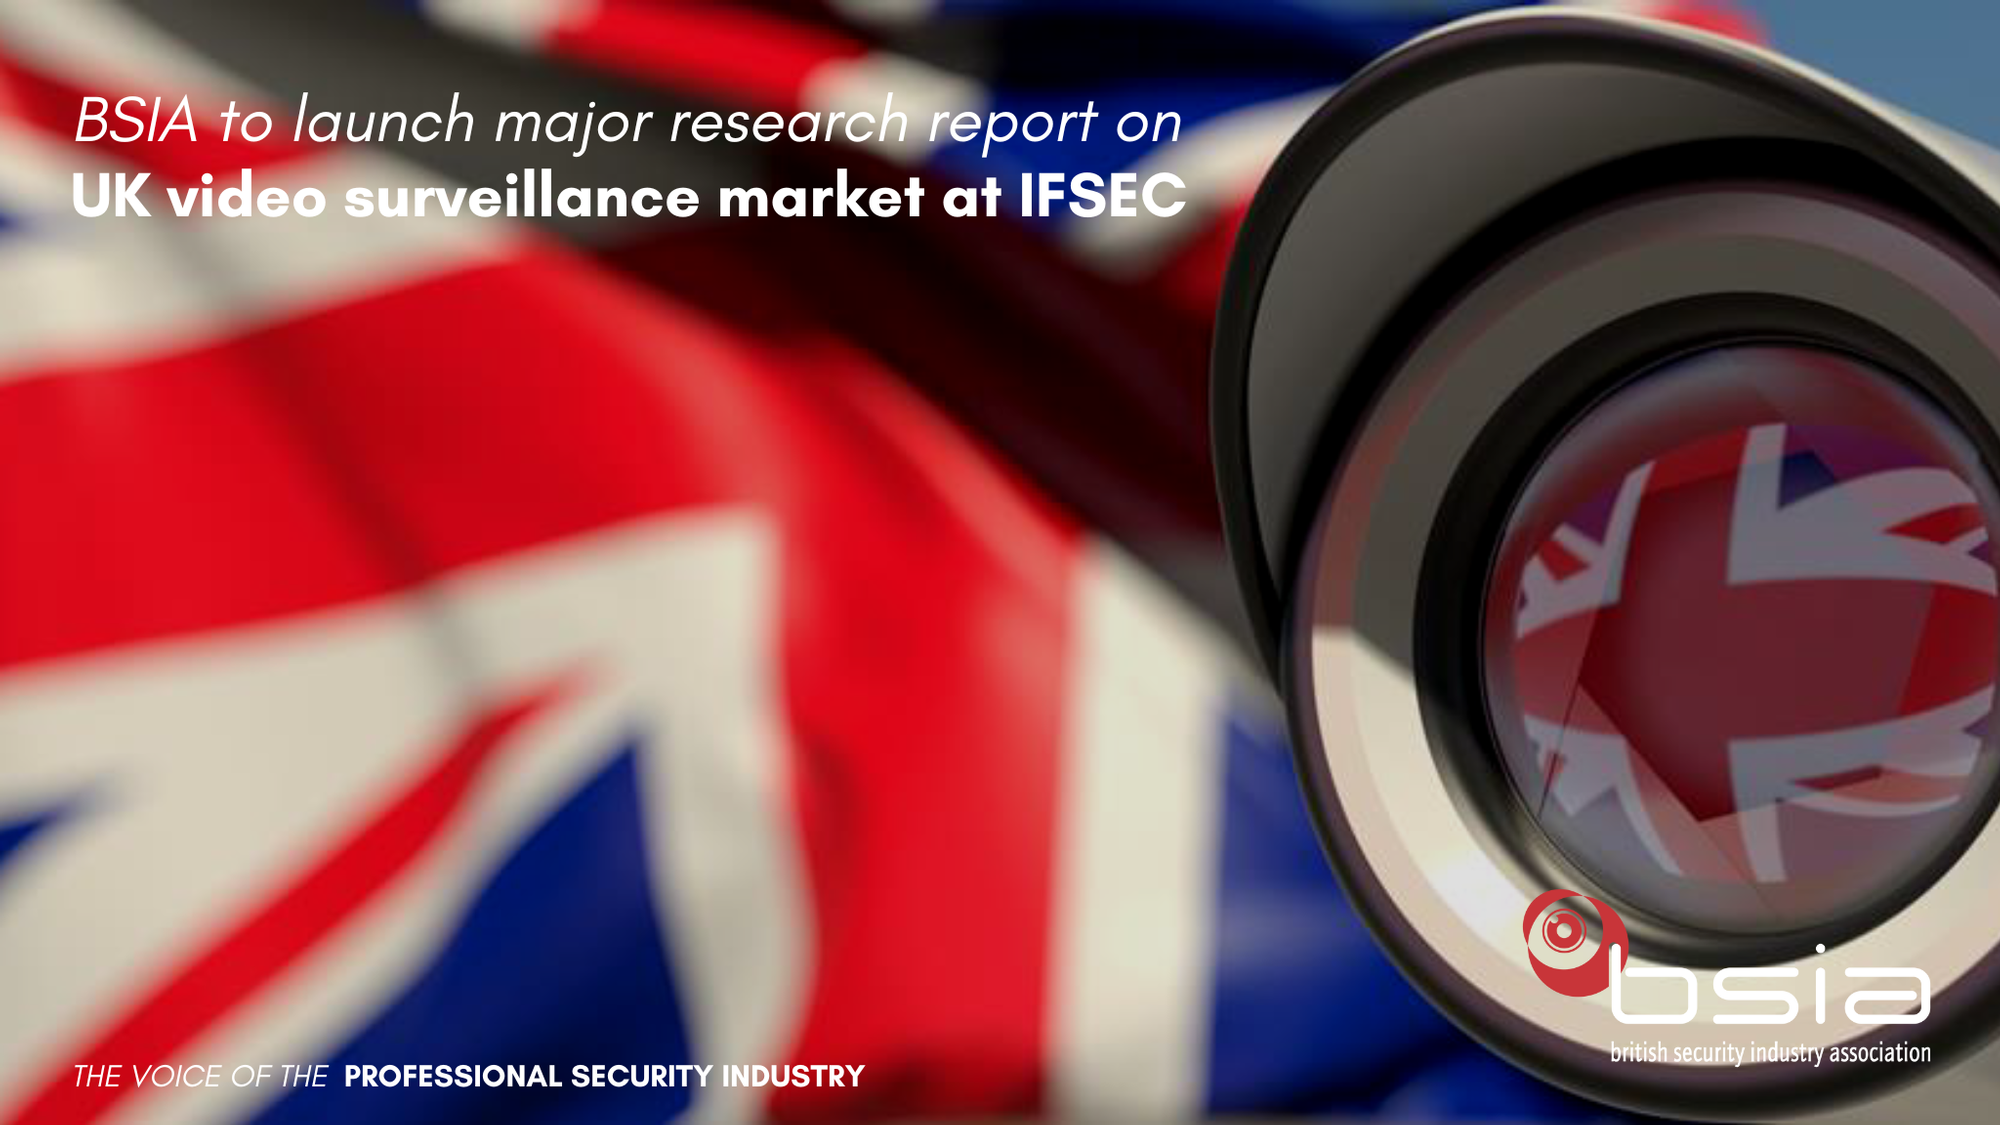 BSIA to launch major research report on UK video surveillance market at IFSEC International